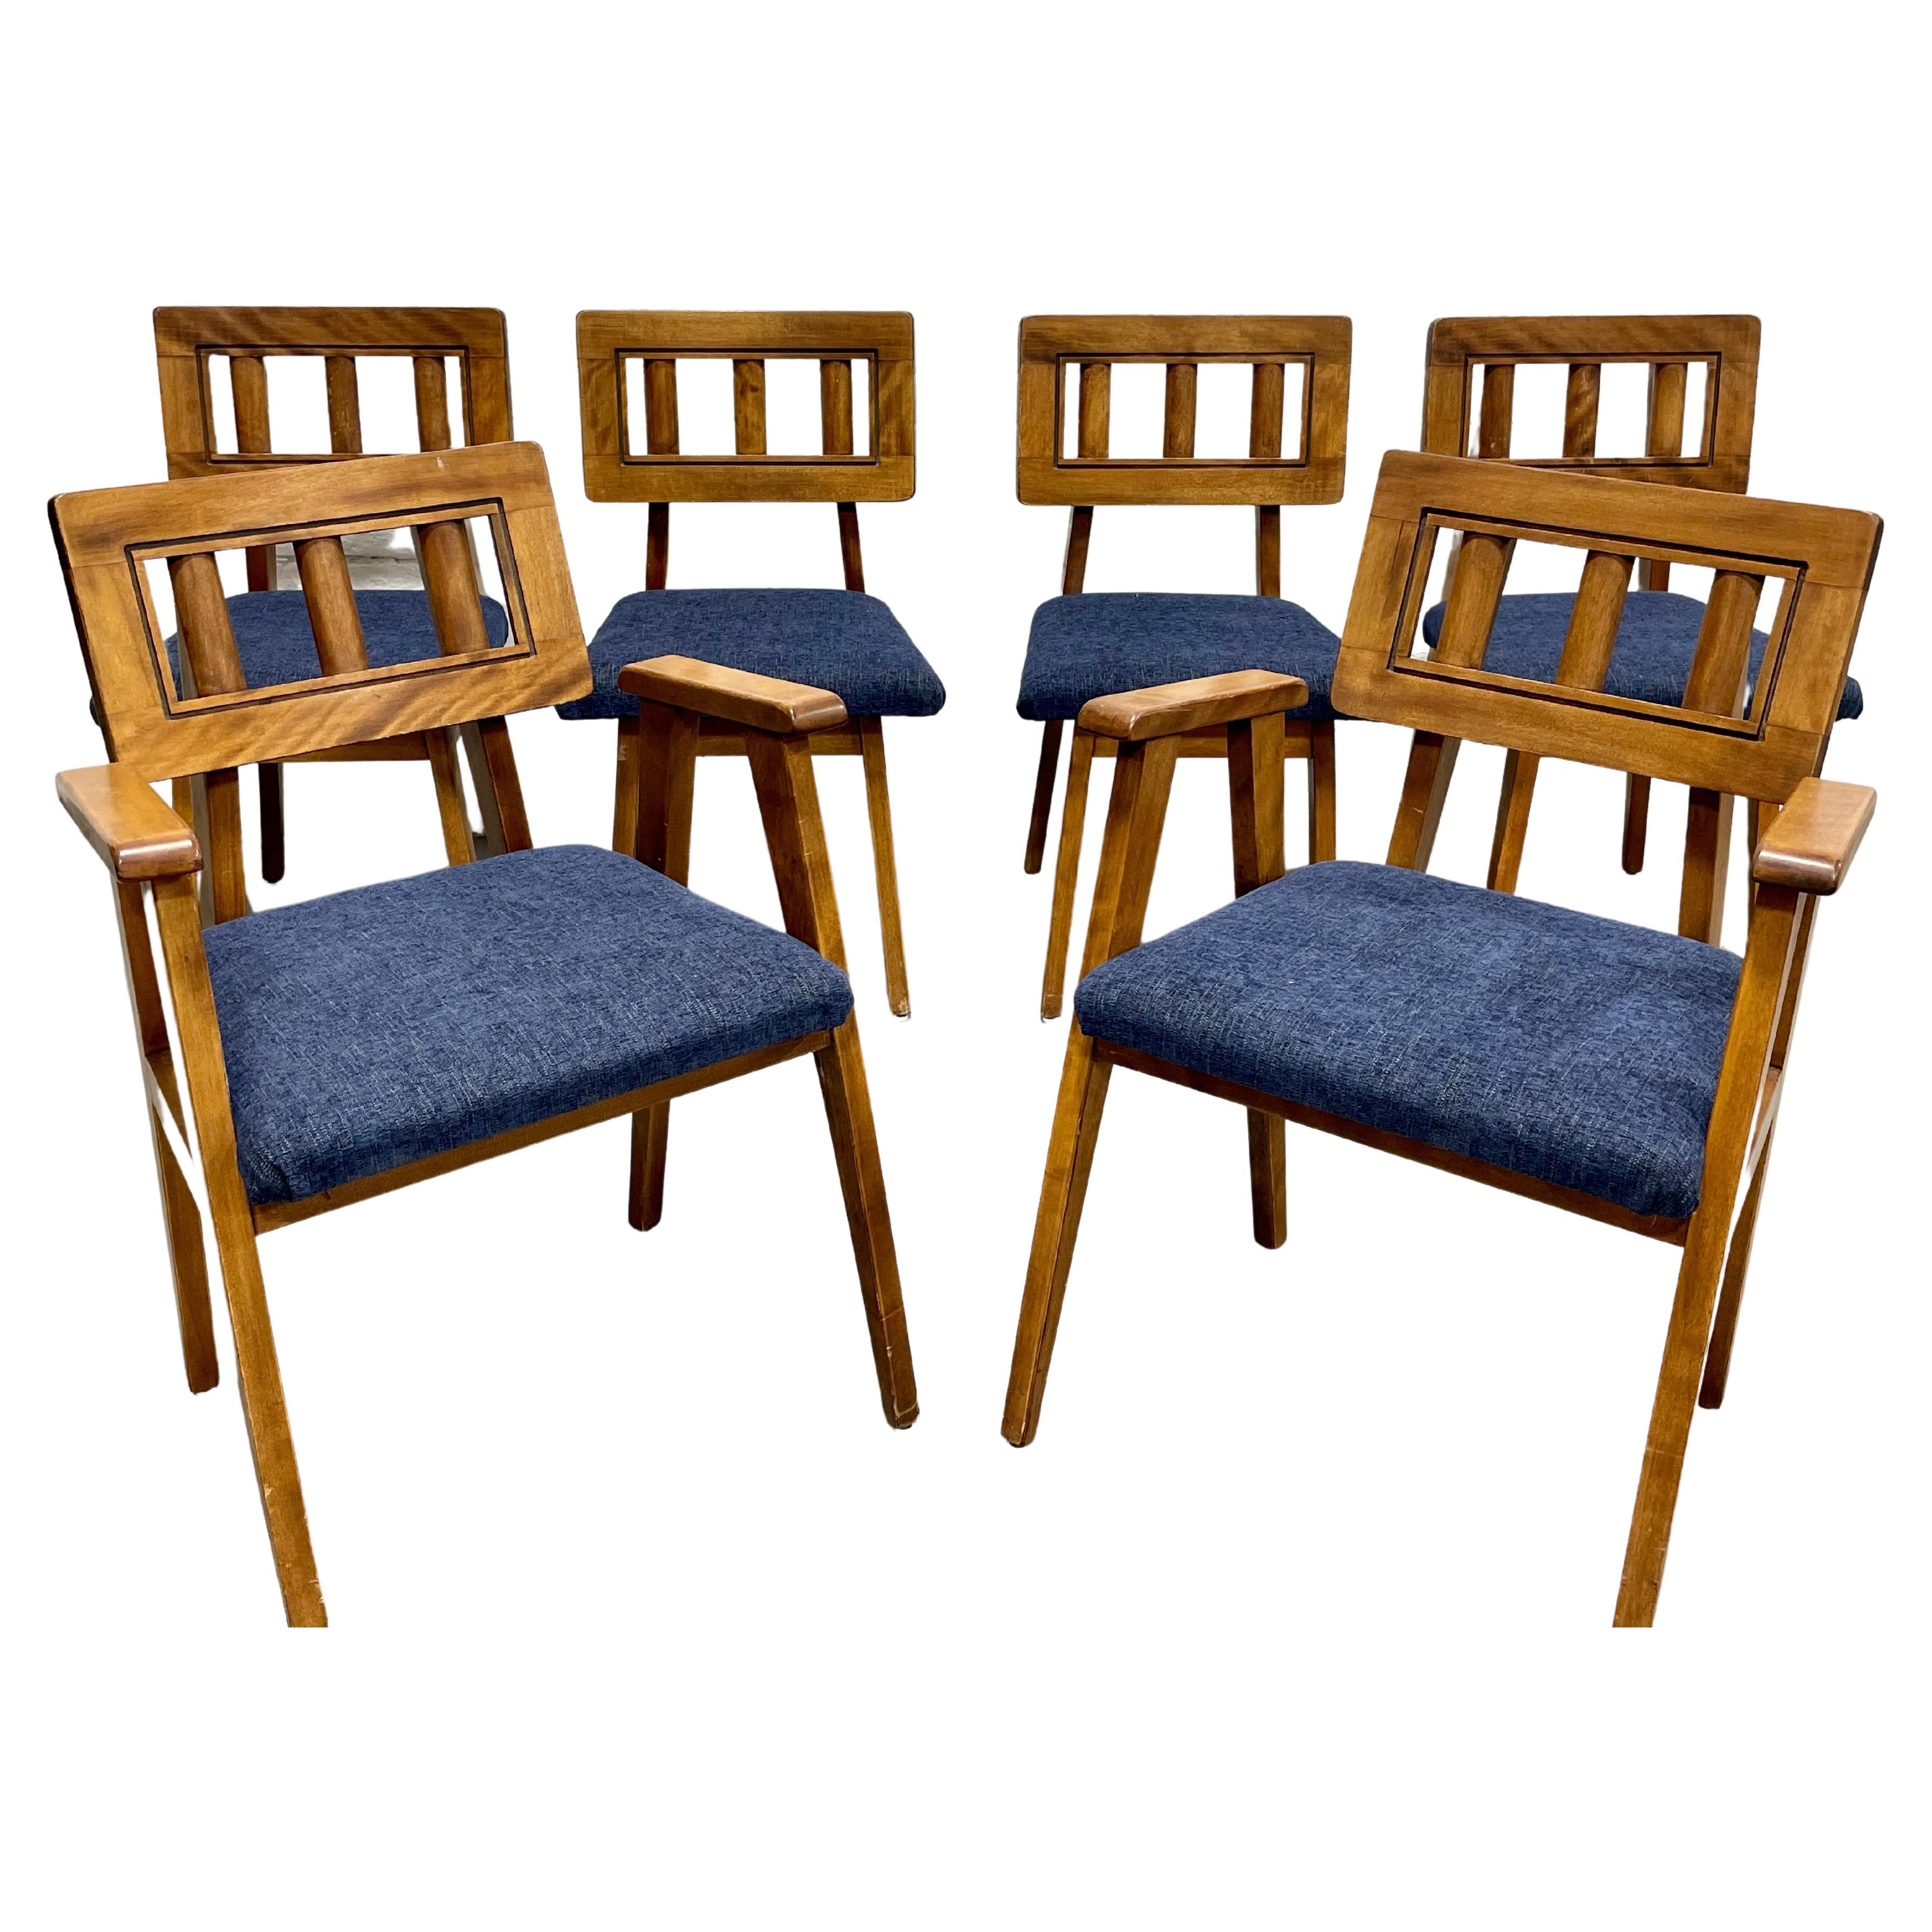 Mid-Century Modern Walnut Dining Chairs + New Denim Upholstery, Set/6 For Sale